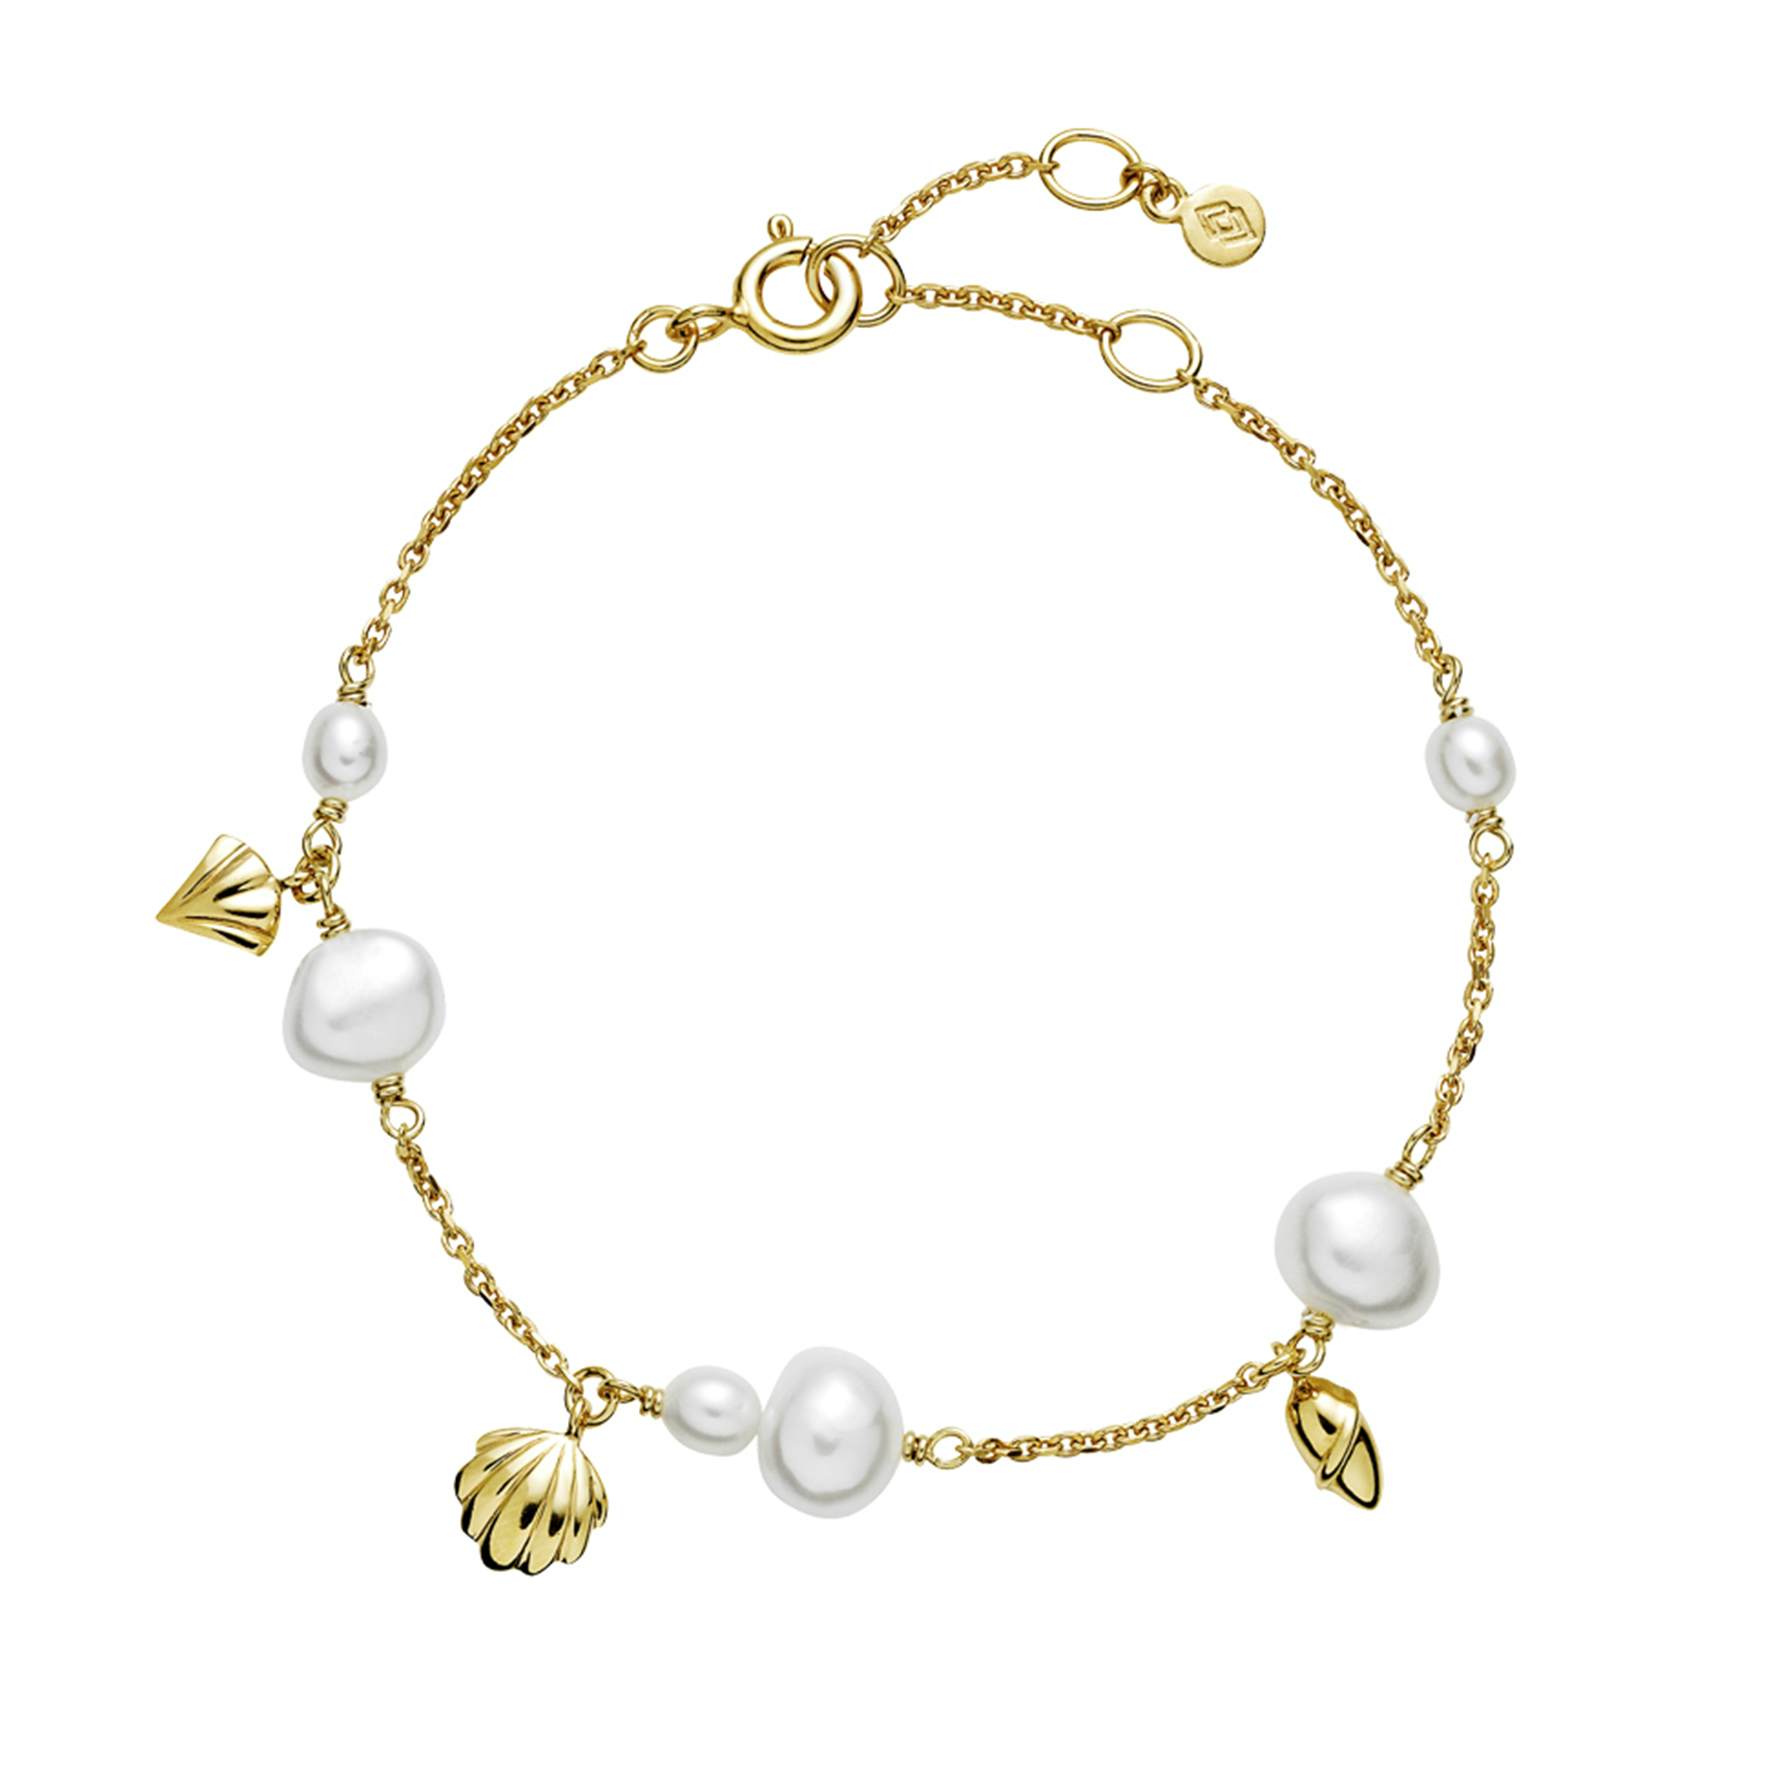 Isabella White Bracelet from Izabel Camille in Goldplated-Silver Sterling 925